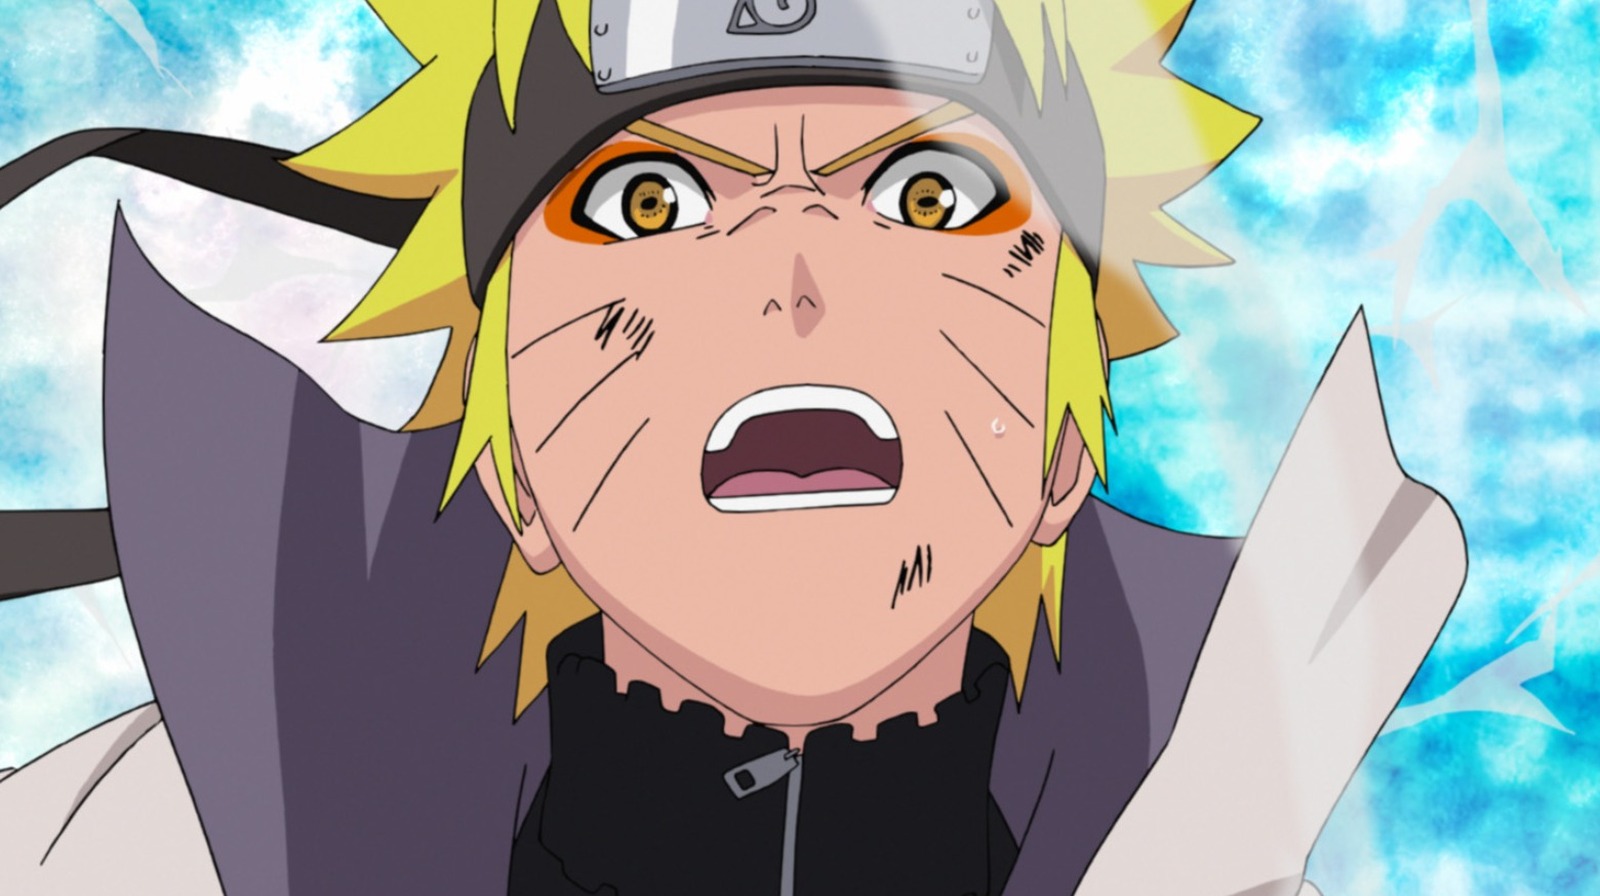 Why is little Naruto so poor when his parents are former Hokage